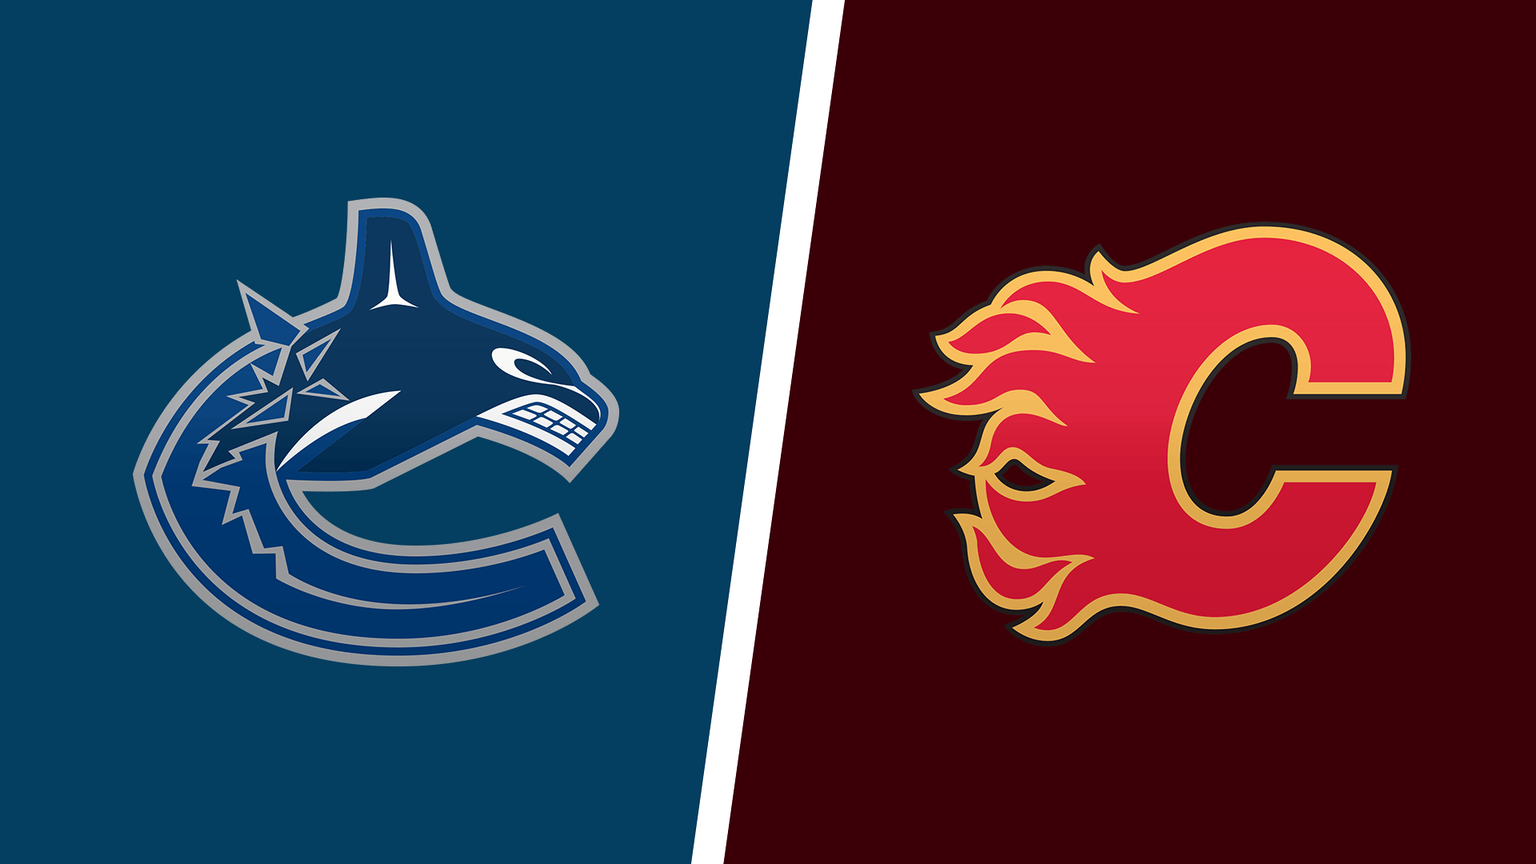 How to Watch Calgary Flames vs. Vancouver Canucks Game Live Online on